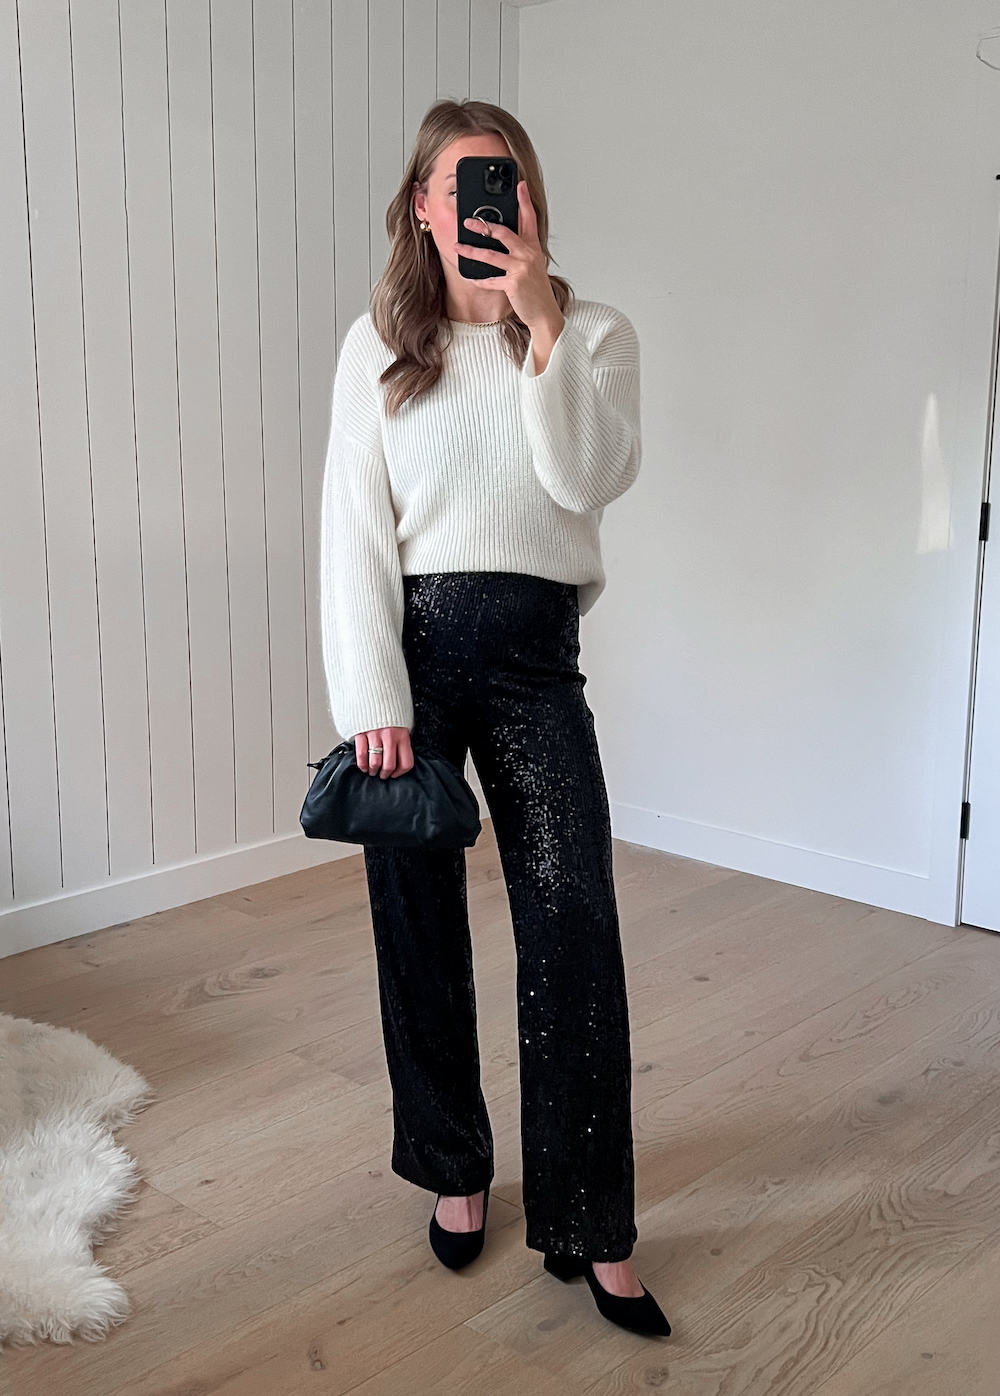 A woman wearing sparkly black wide-leg pants with a white knit crewneck sweater, black heels, and a dark green clutch